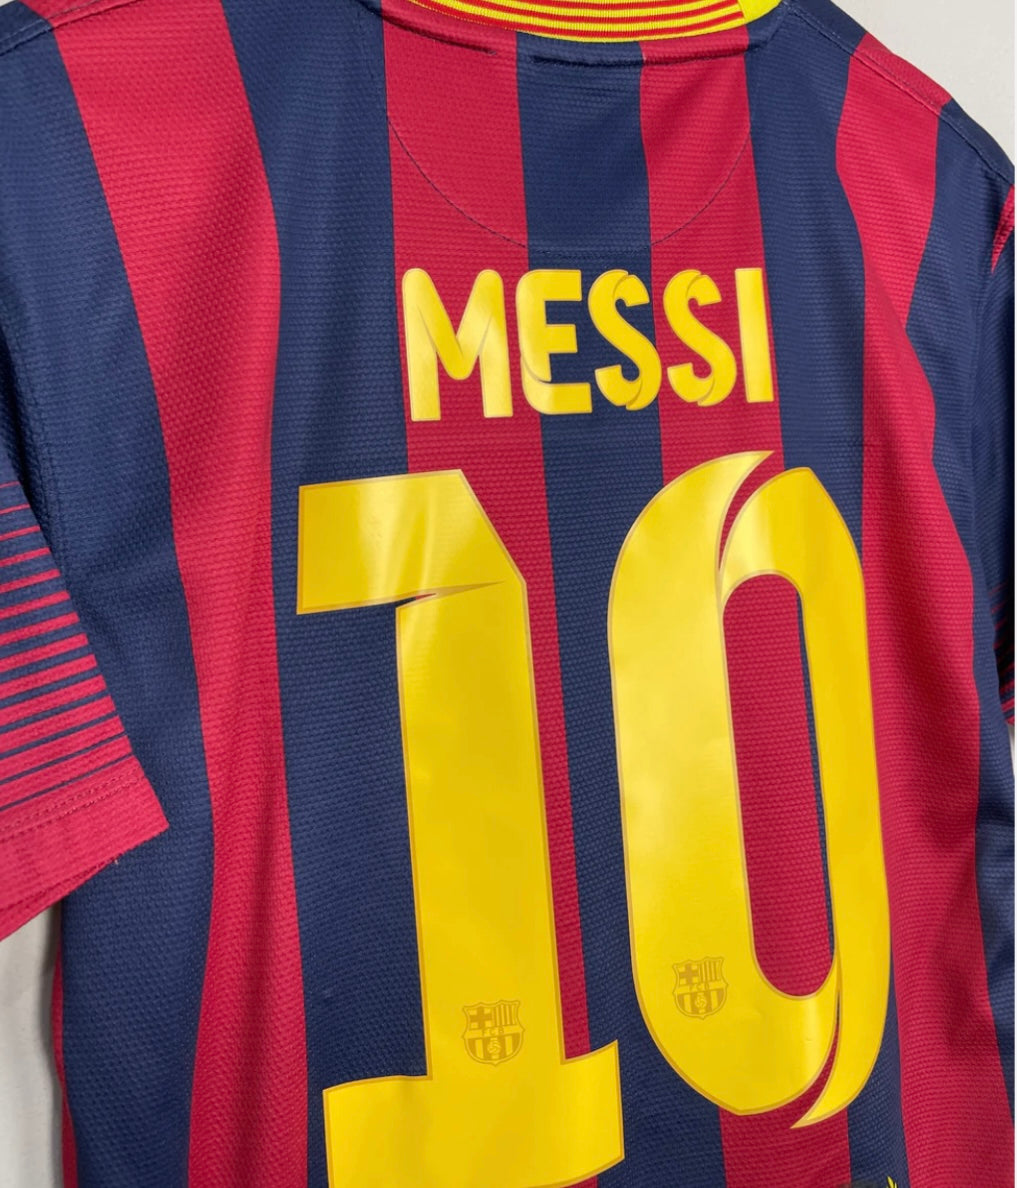 Lionel Messi FC Barcelona Nike 2013/14 Season Home Kit Iconic Authentic Nike Jersey - Blue & Red